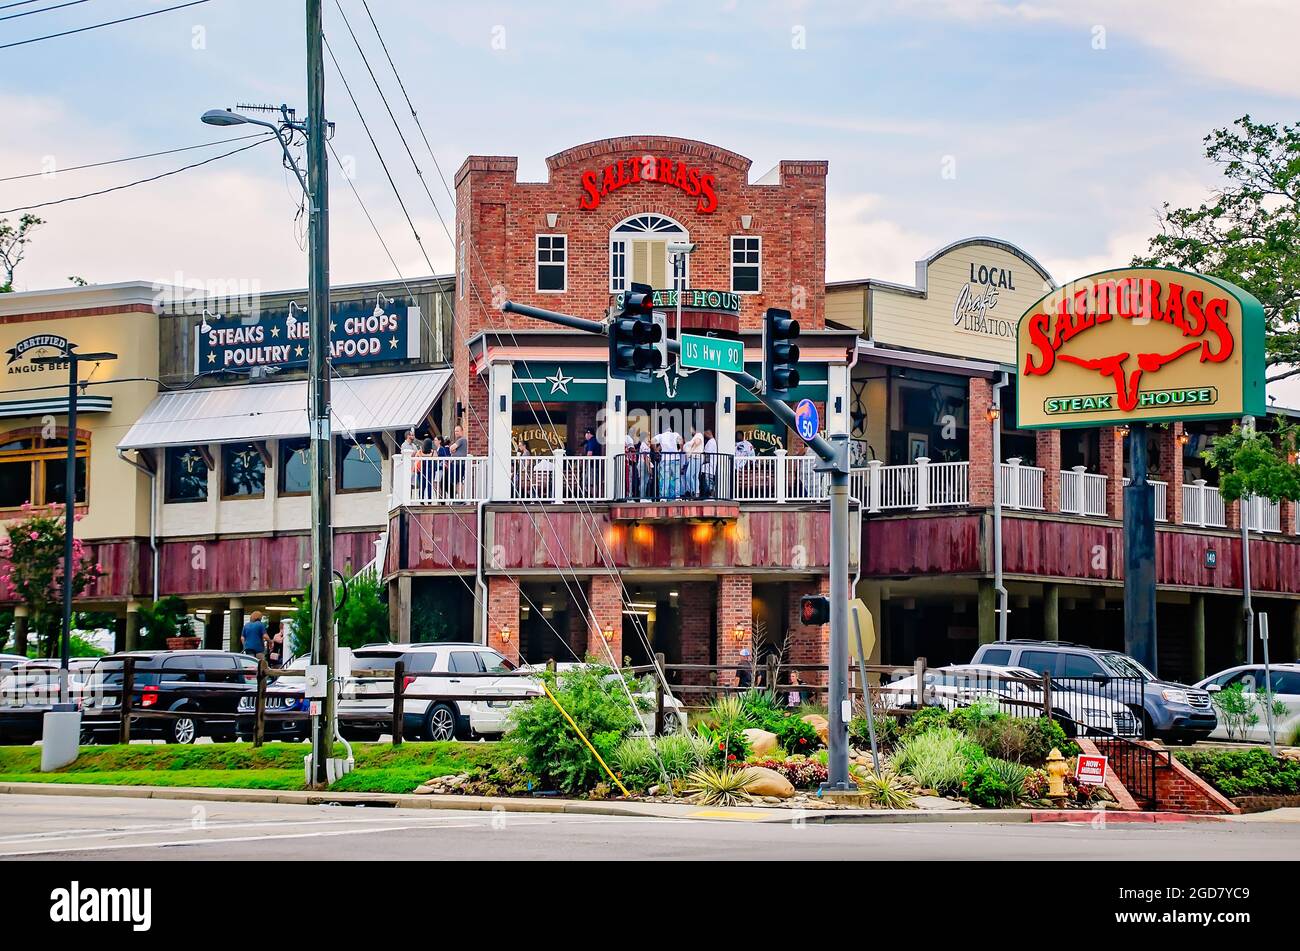 Saltgrass Steak House is pictured, July 24, 2021, in Biloxi, Mississippi. The steakhouse opened its Biloxi location in 2018. Stock Photo